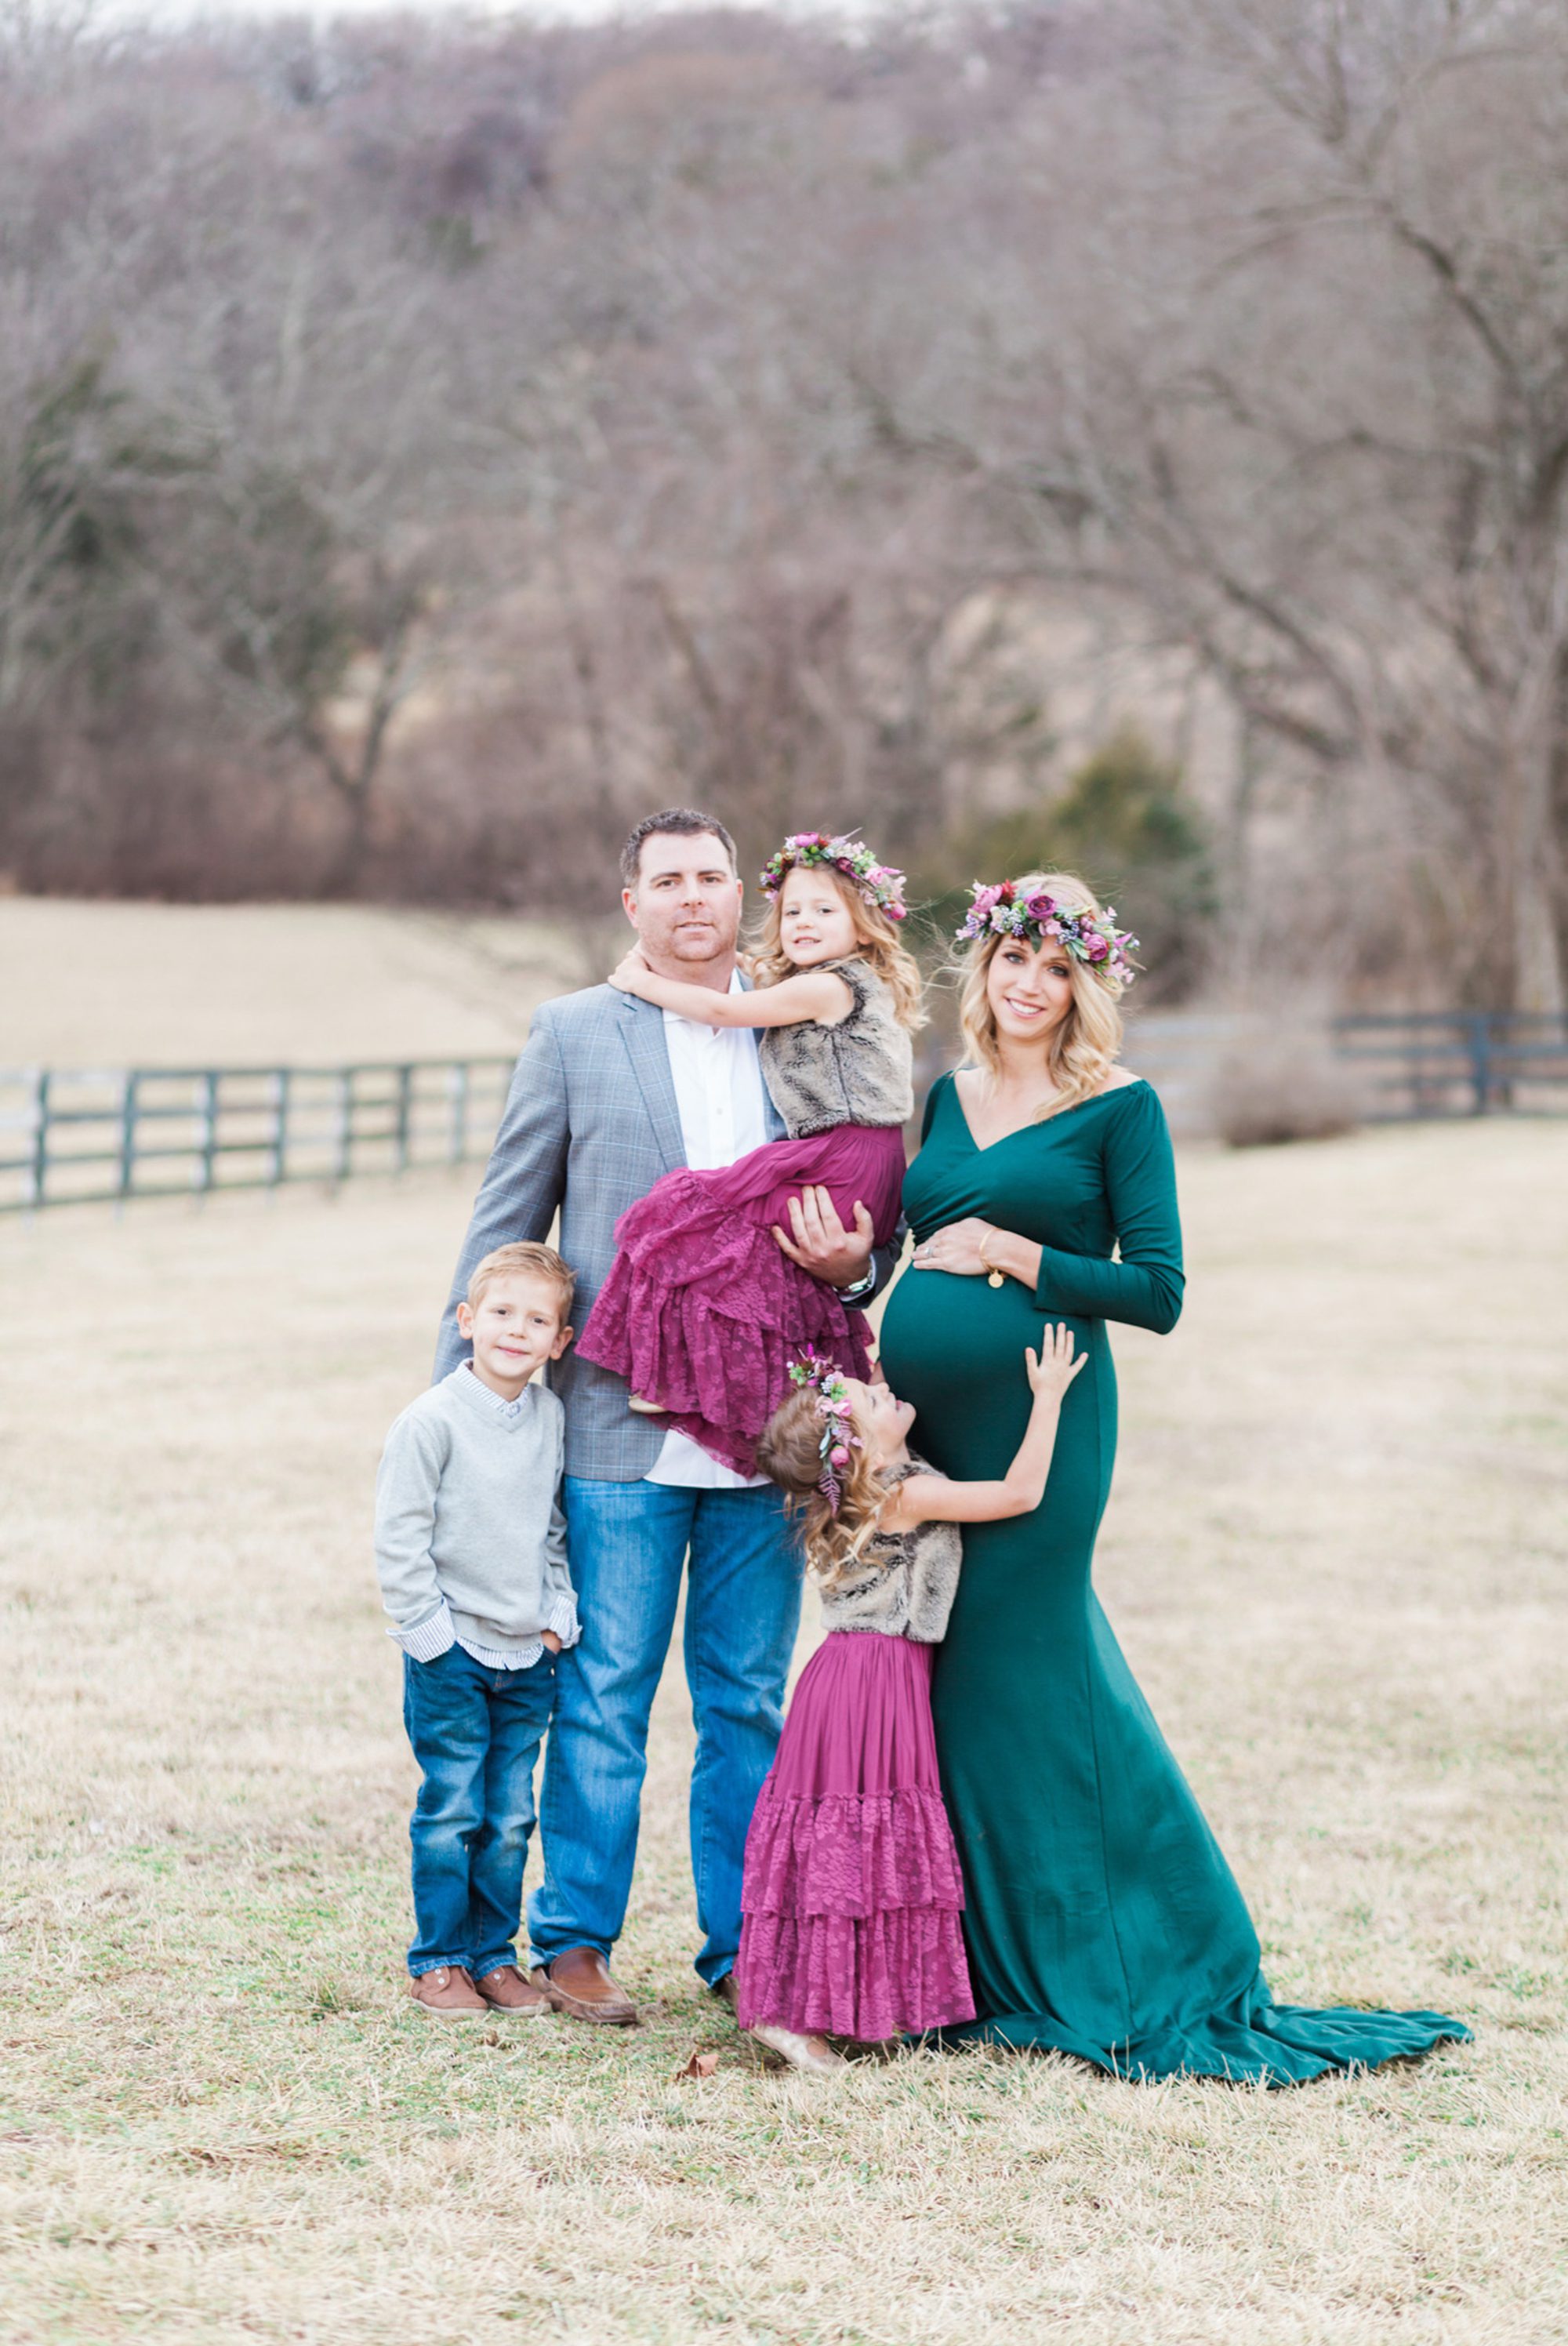 Winter Family Maternity Photo Session in Brentwood, TN. Photo by Krista Lee Photography Nashville TN